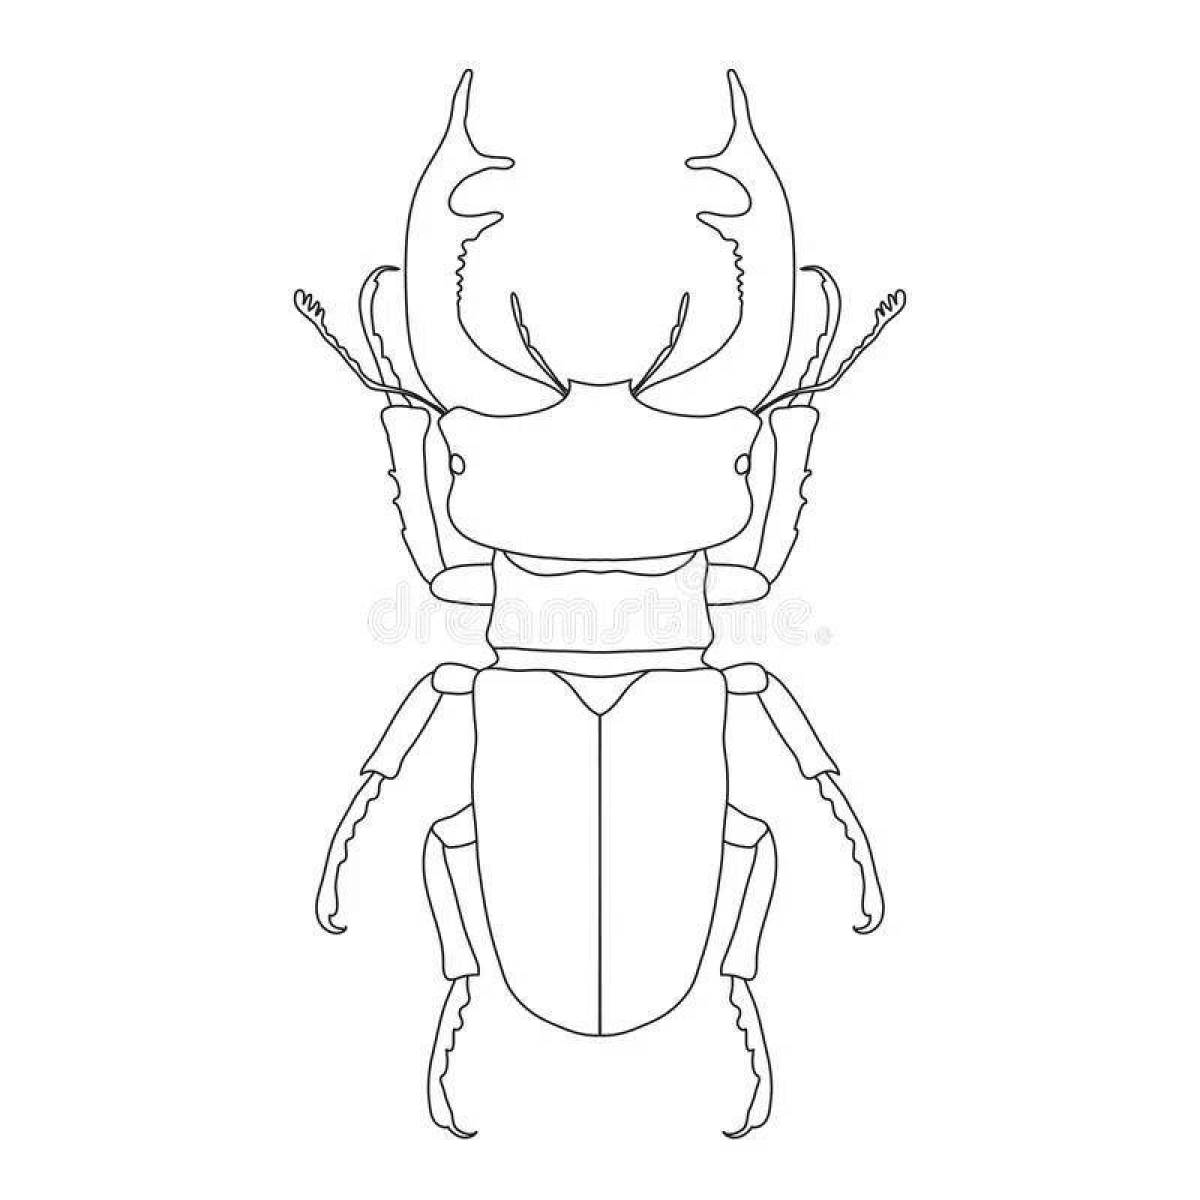 Impressive stag beetle coloring book